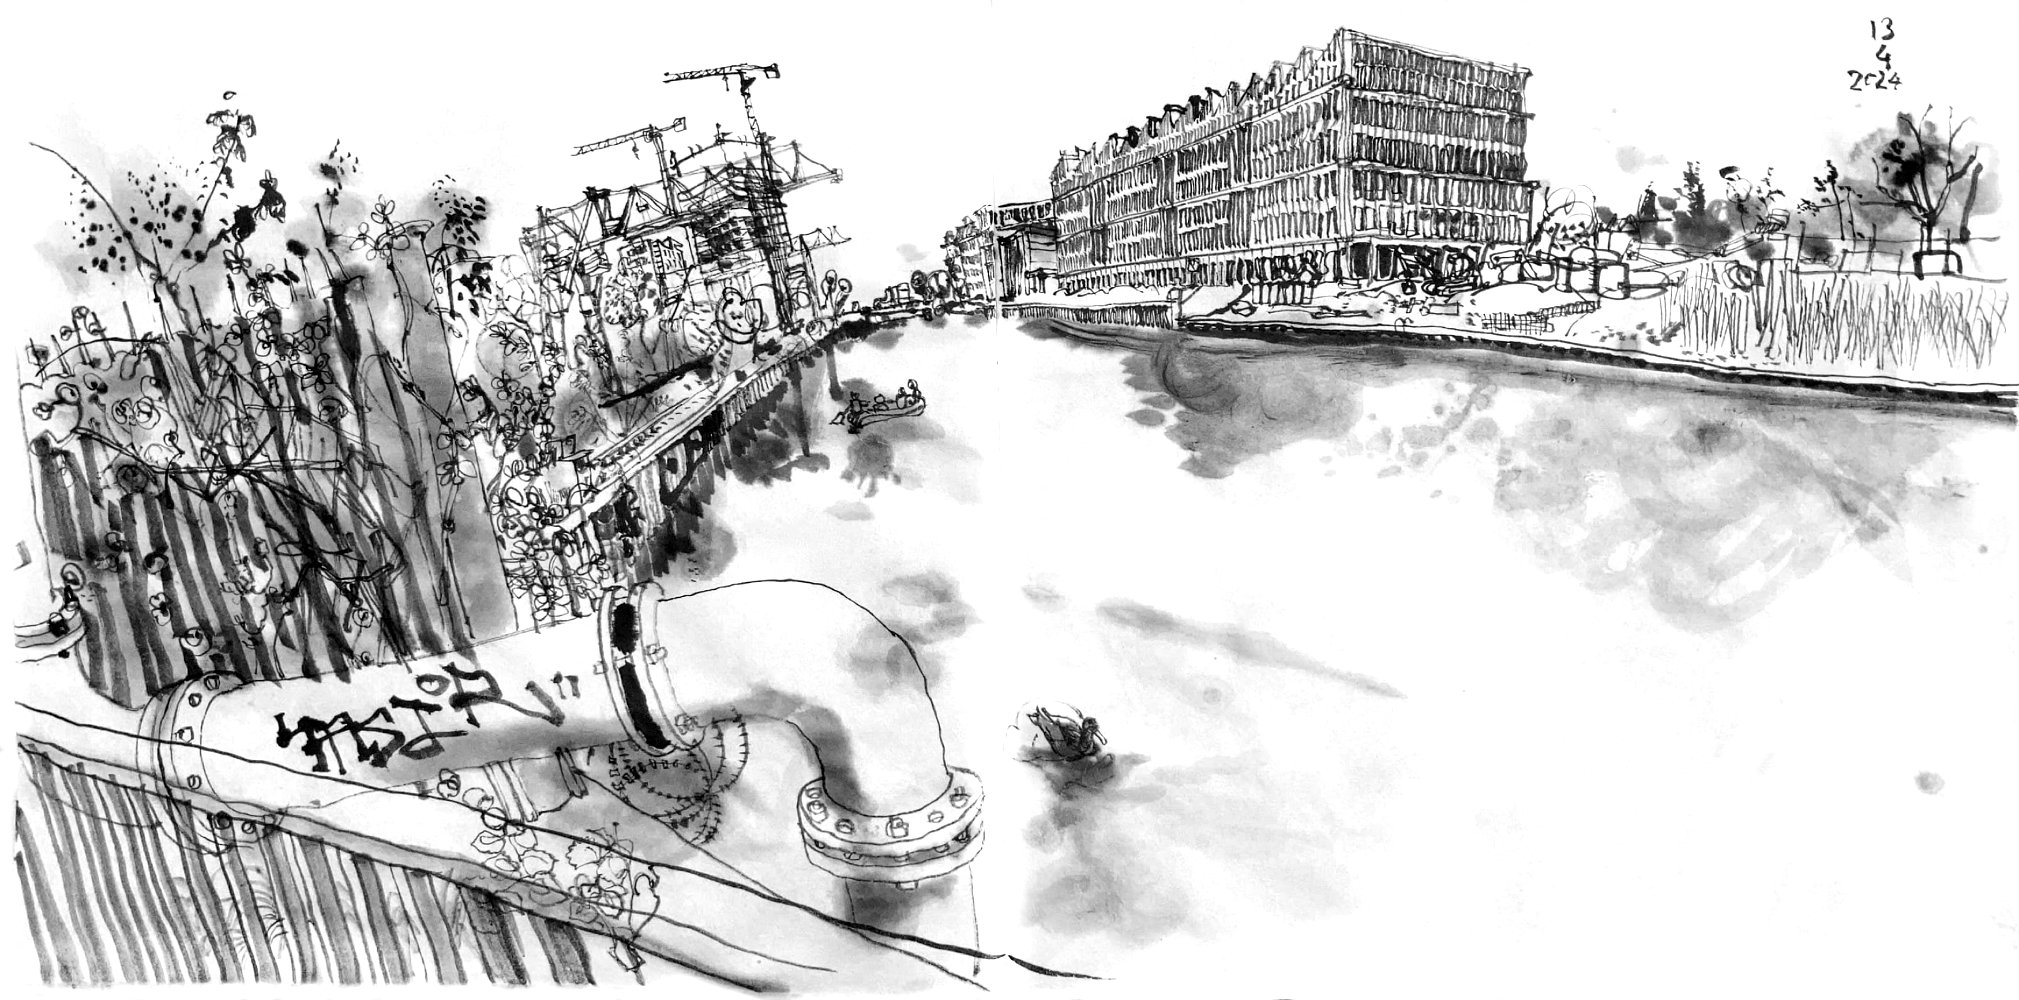 Ink drawing of a canal: on the left in the foreground is a pipe, coming from above and bending twice, into the canal. Behind the pipe is a fence, behind the fence a site on the left canal bank with some small trees and two harbour cranes, reching fro the site a bit over the canal. bejind the cranes in the backgound is a high rise building under construction, two construction work cranes aide of it. On the right (opposite) bank of the canal are office buildings, one brand new in front, some construction machines and material still aside of it. In the canal is a duck in the foreground and a rubber dinghy with four passengers further back.